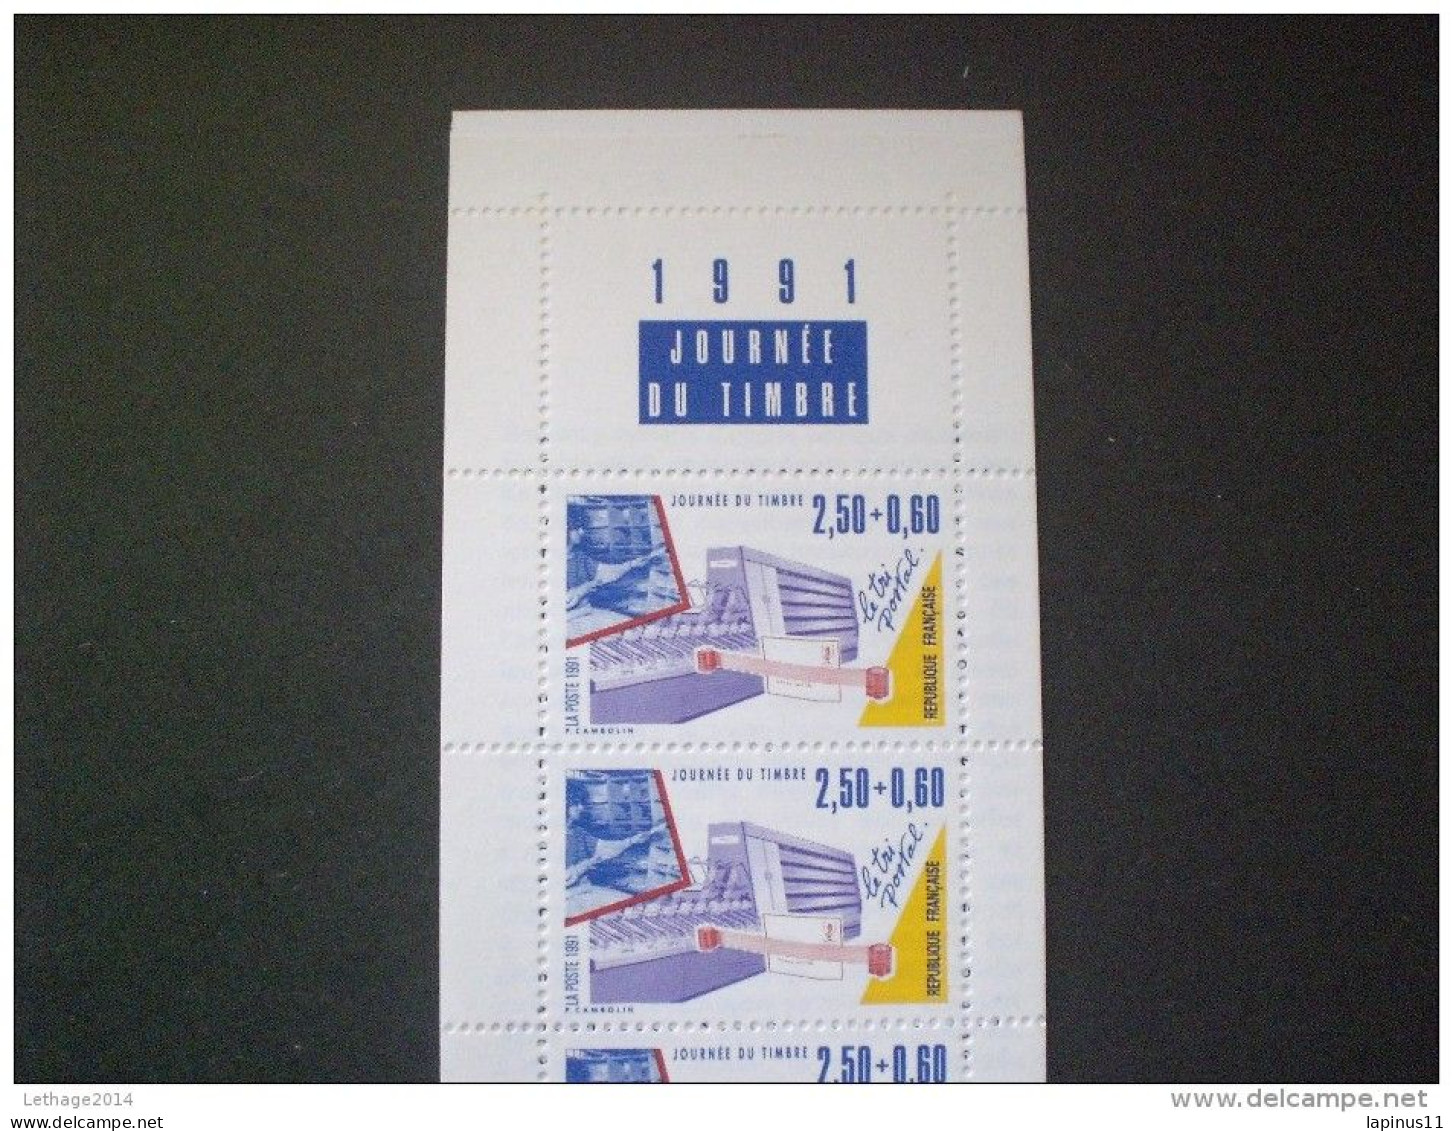 STAMPS FRANCE CARNETS 1991 The Day Of Stamps - Bekende Personen